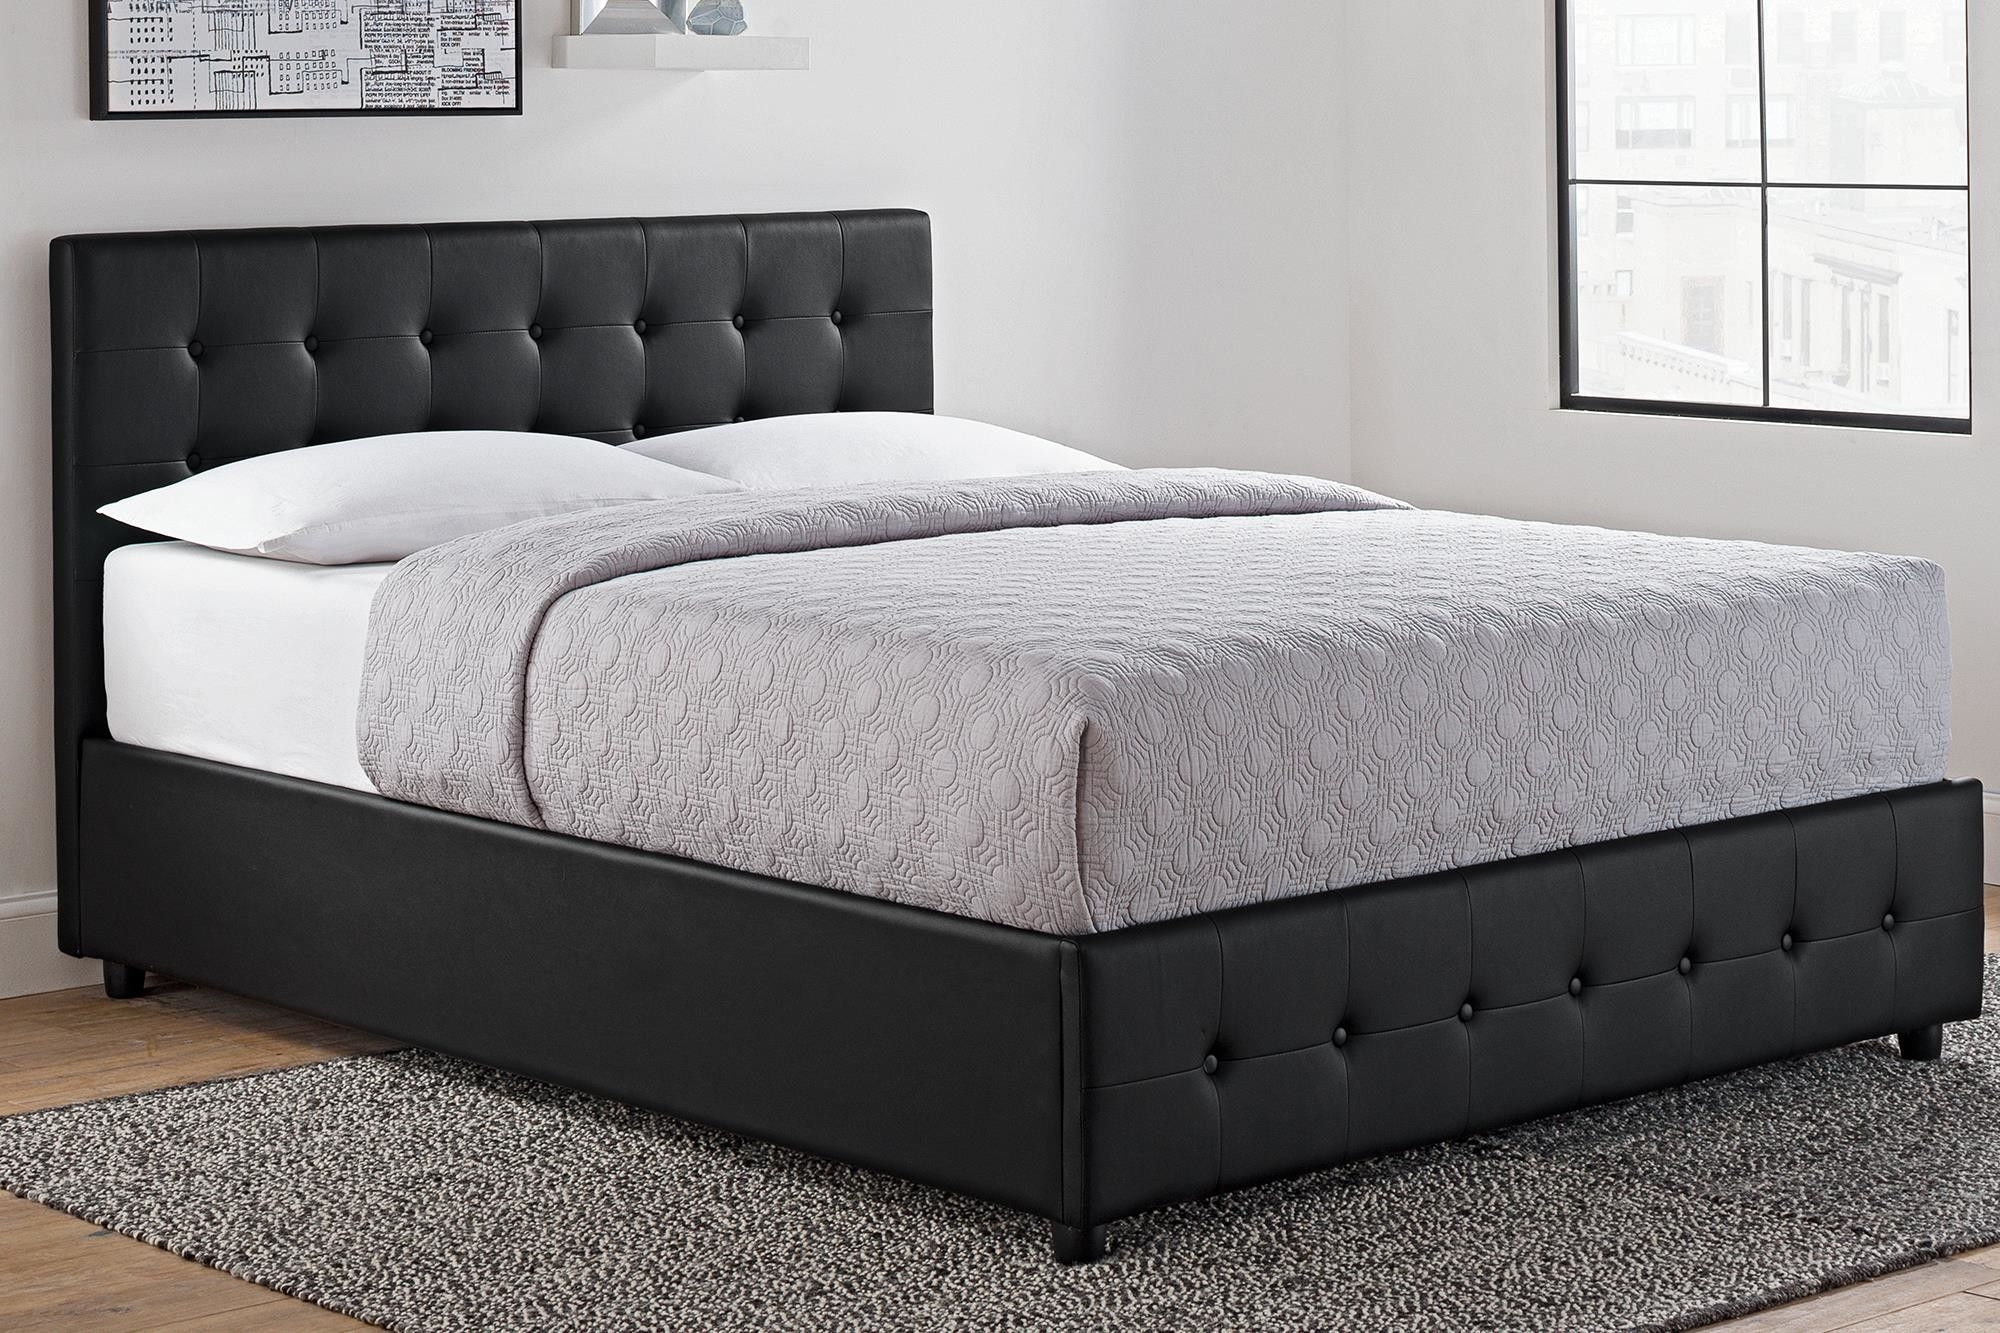 Lift Up Storage Bed Visualhunt, Leather Bed Frame With Drawers